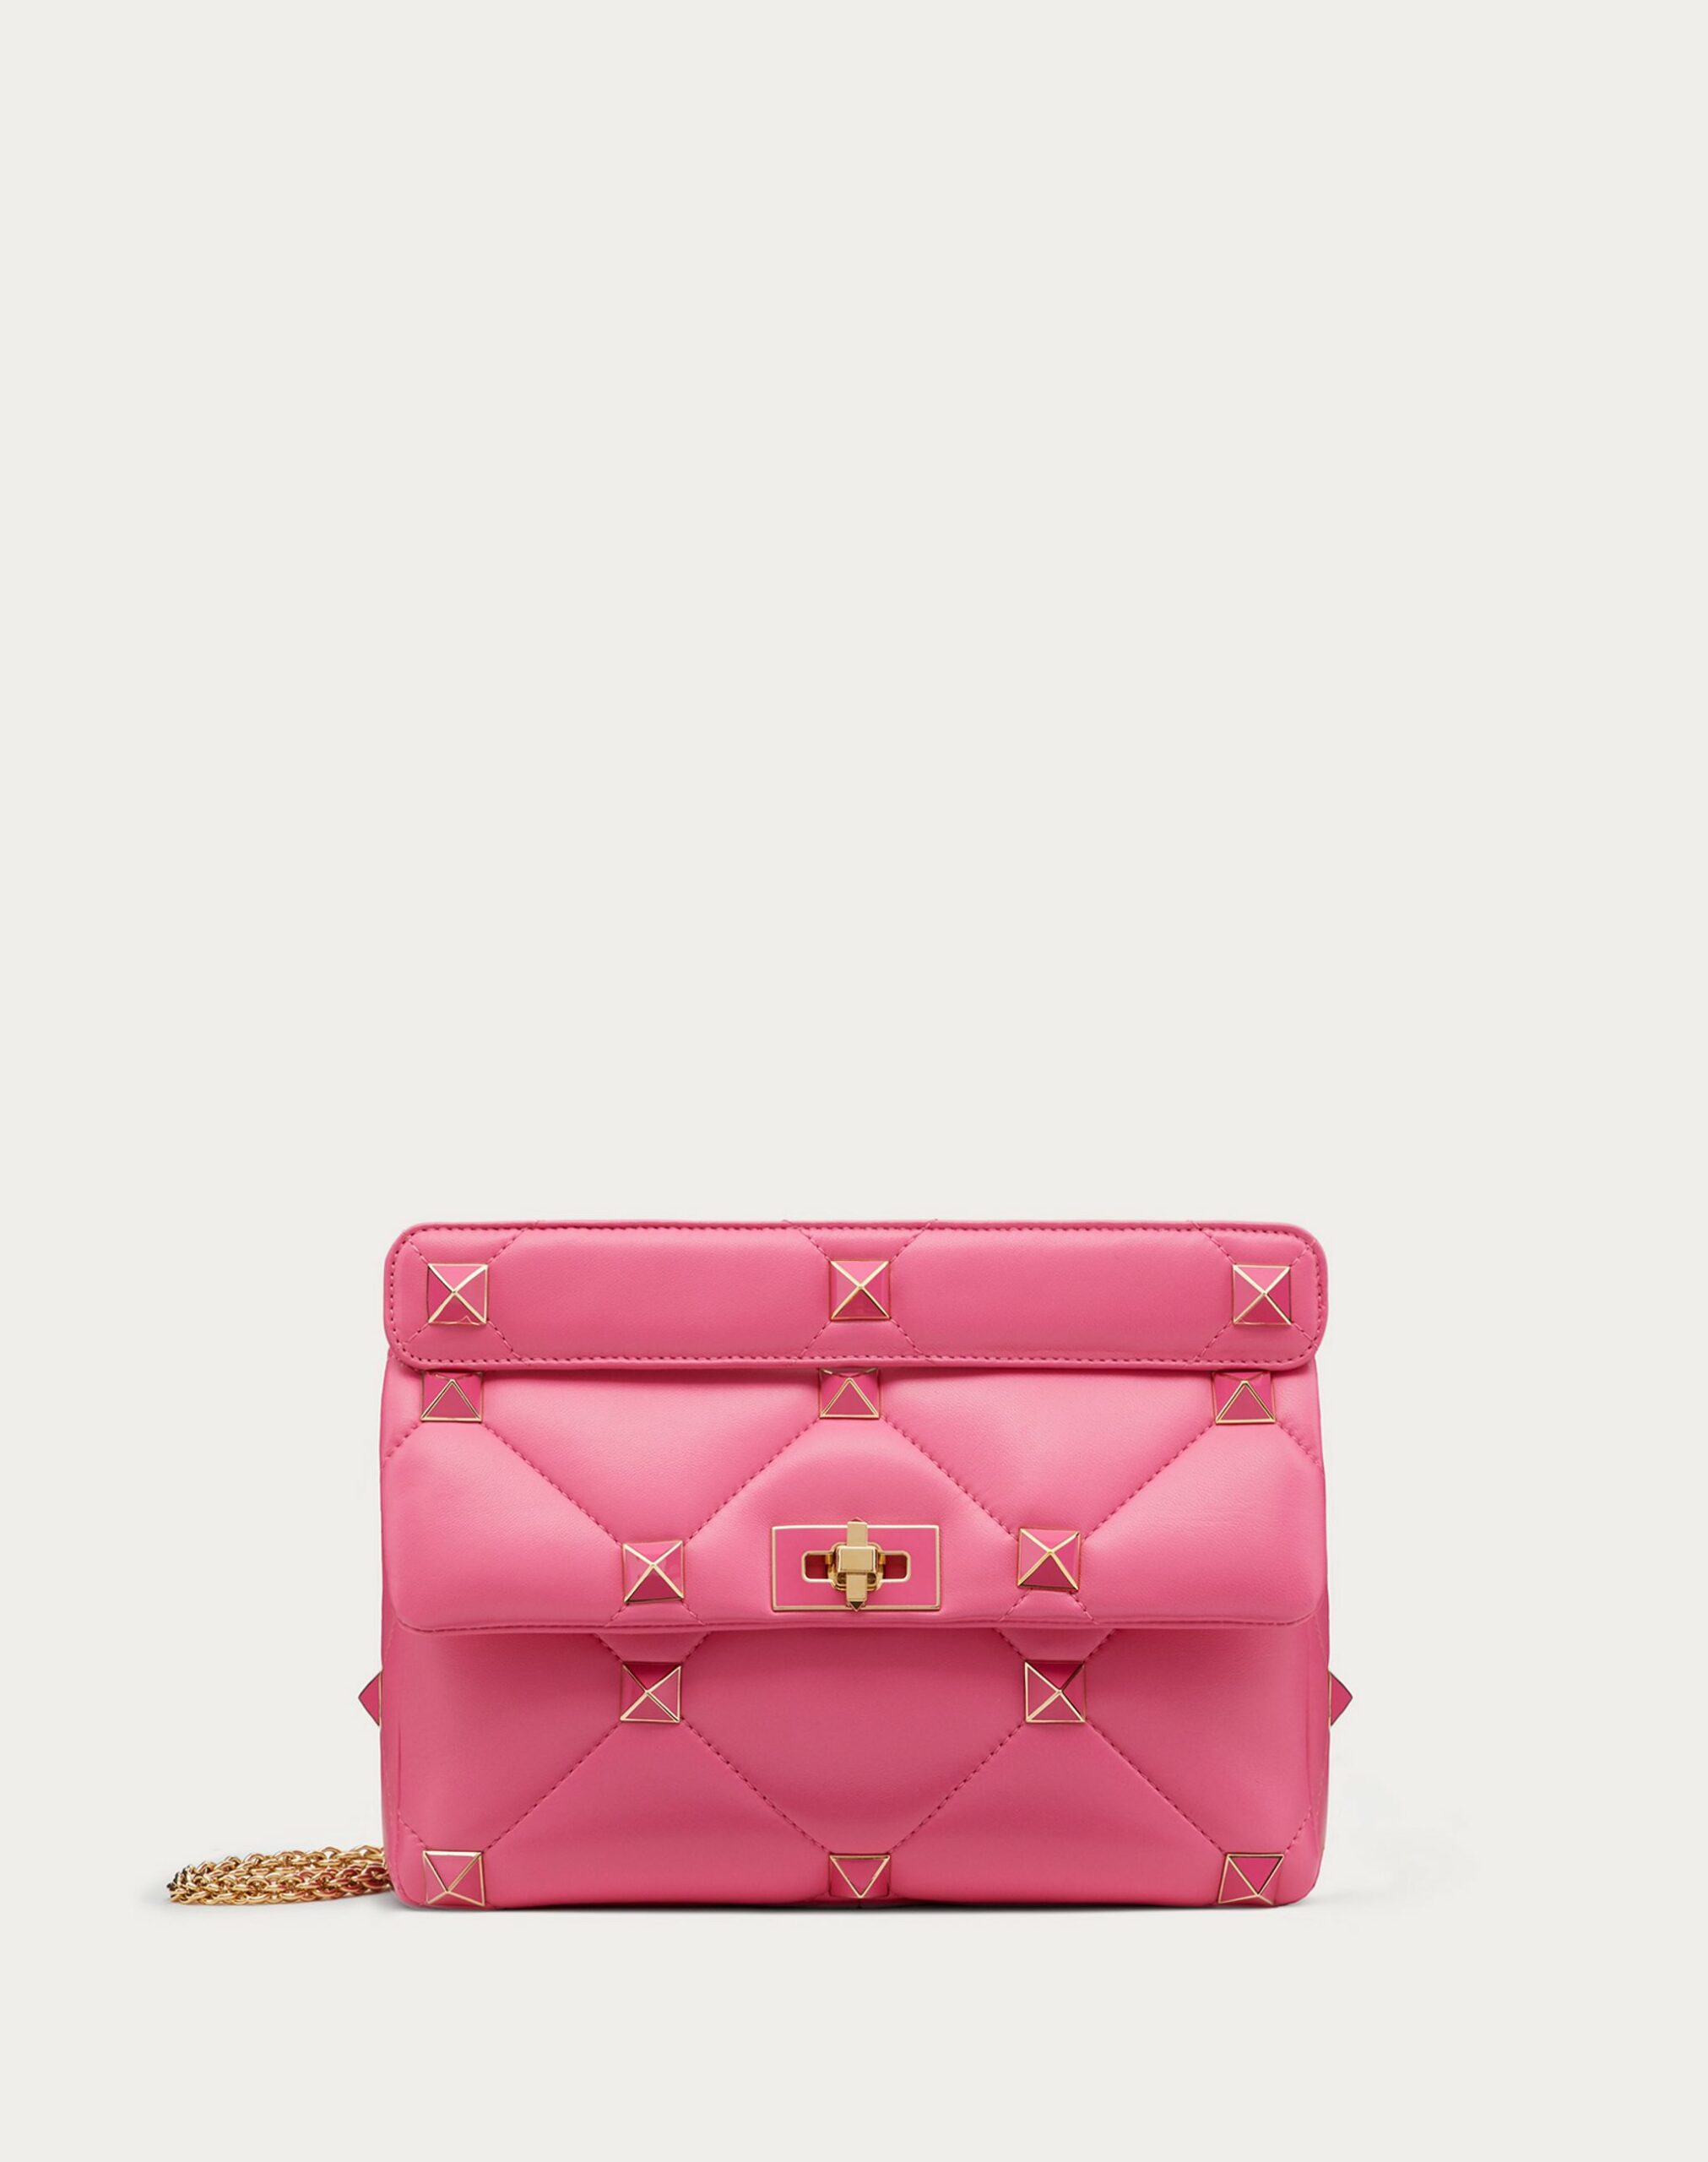 Valentino Large Roman Stud The Shoulder Bag In Nappa With Chain And Enamelled Studs Pink (XW2B0I60PTHHW4)